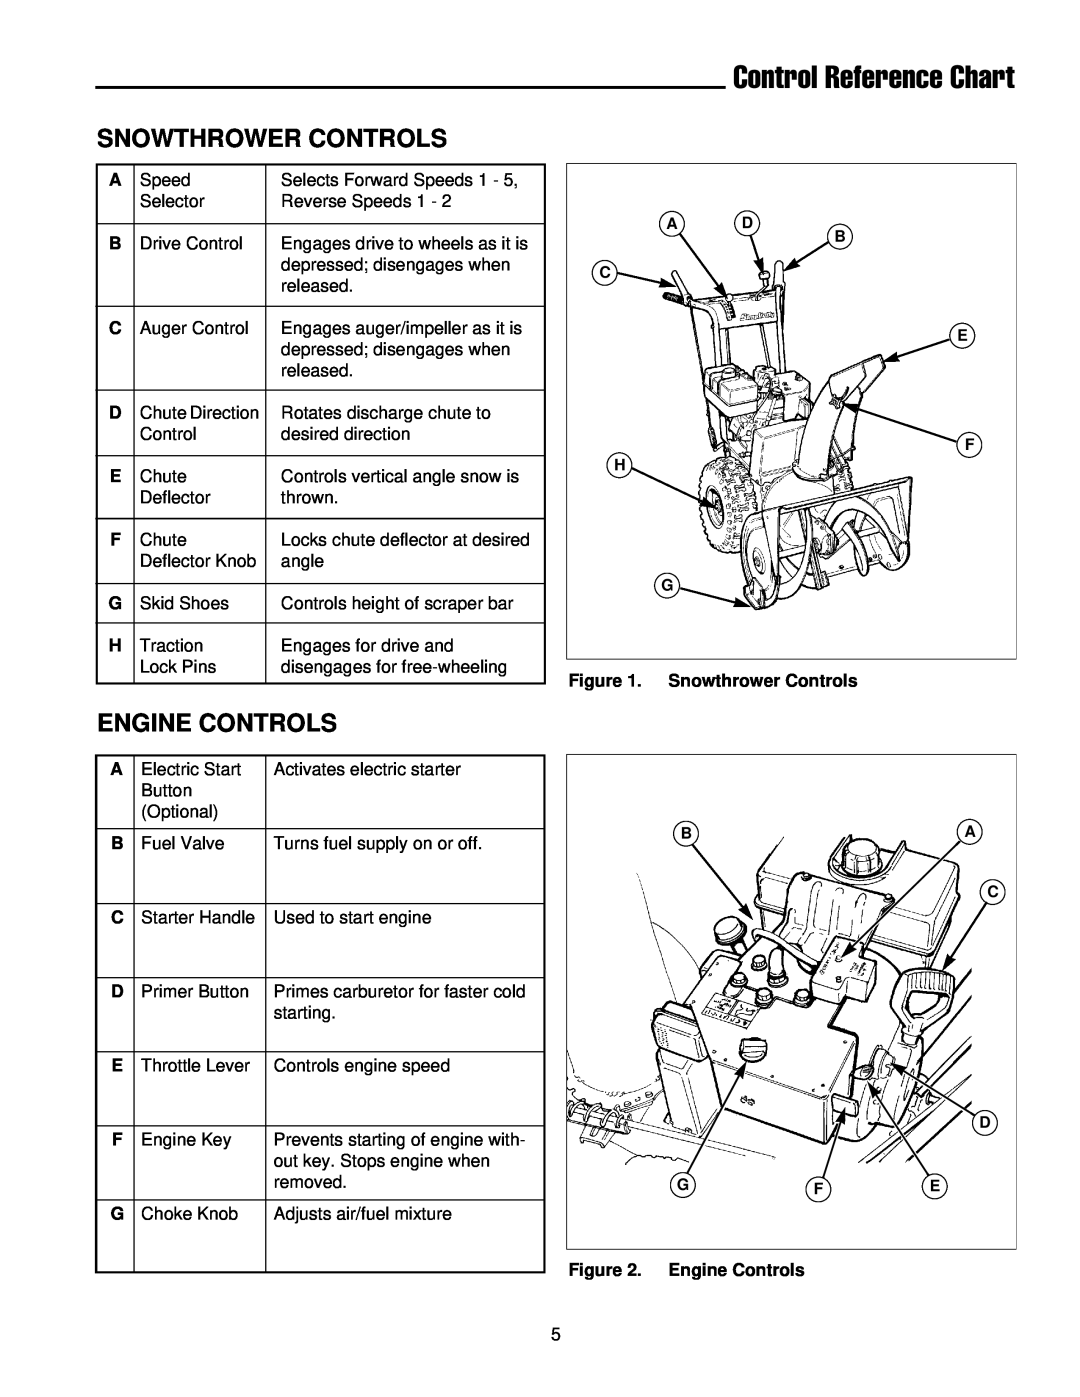 Simplicity 1693161 555M, 1693426 755E, 1693425 555M manual Control Reference Chart, Snowthrower Controls, Engine Controls 